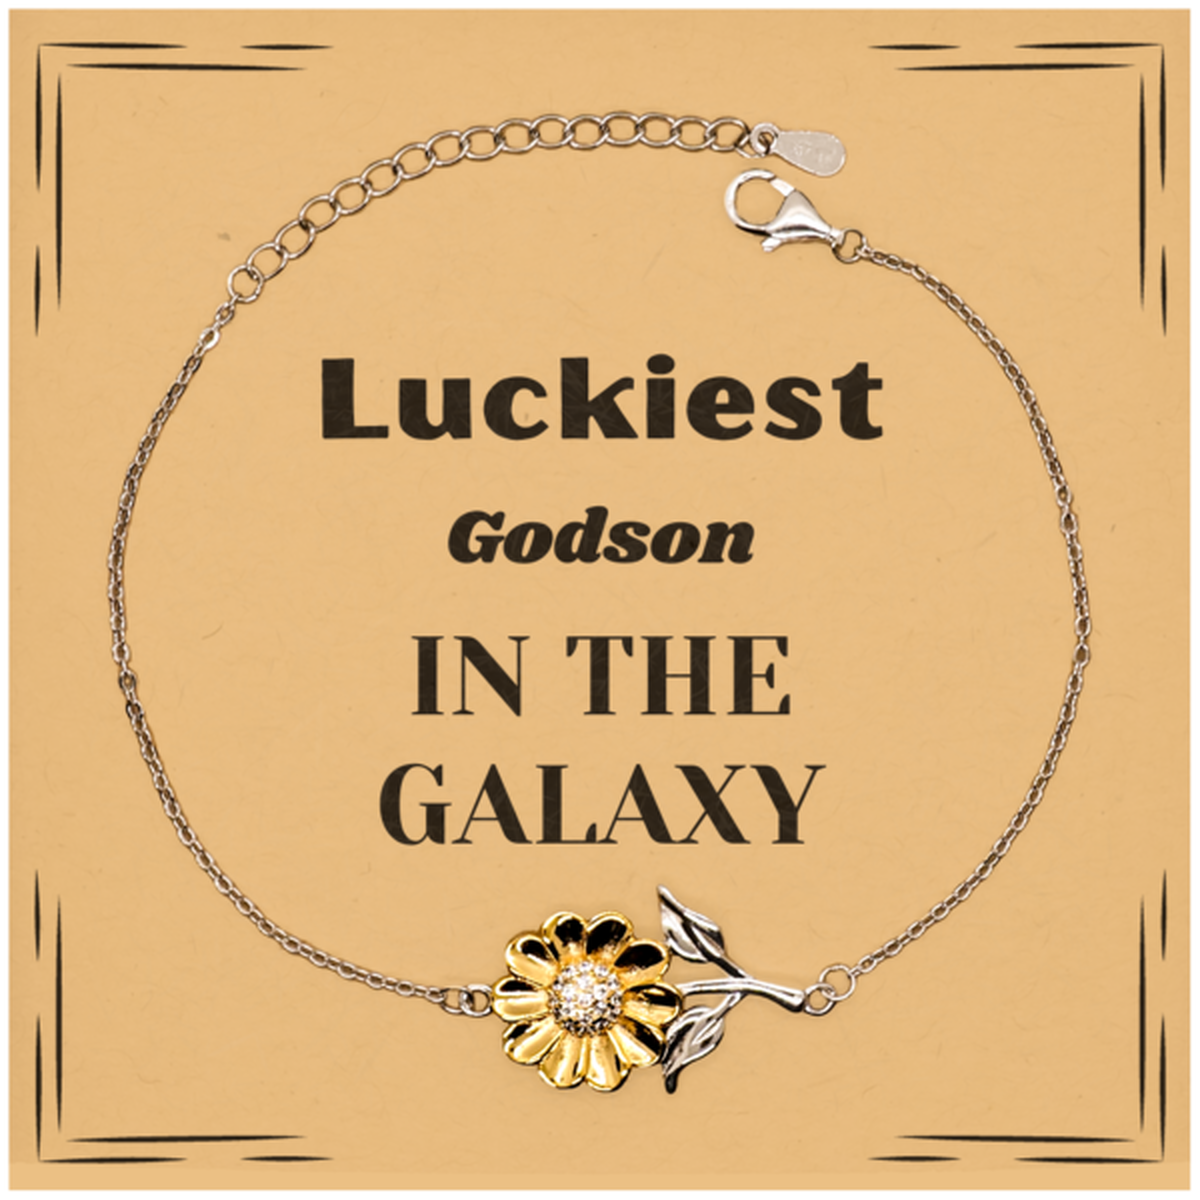 Luckiest Godson in the Galaxy, To My Godson Message Card Gifts, Christmas Godson Sunflower Bracelet Gifts, X-mas Birthday Unique Gifts For Godson Men Women